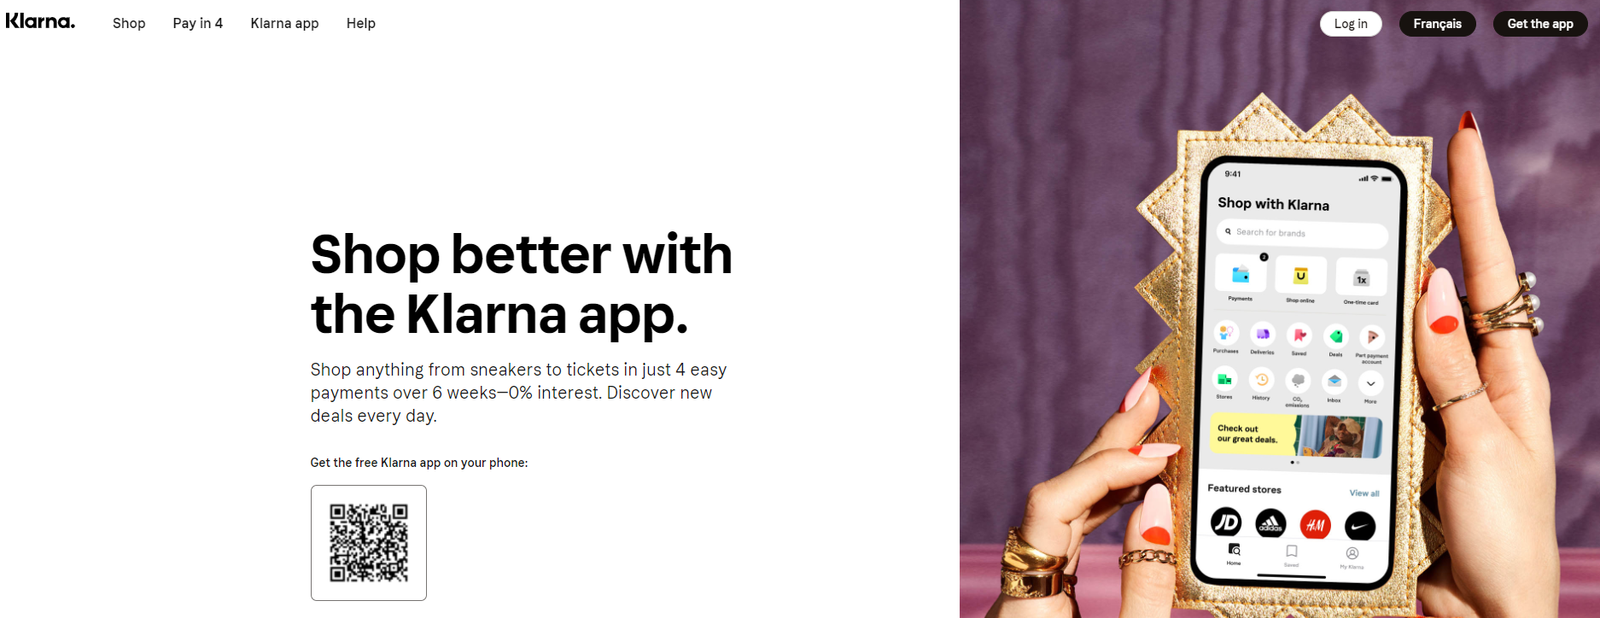 Klarna uses a button and QR code to "Get App" on their website 